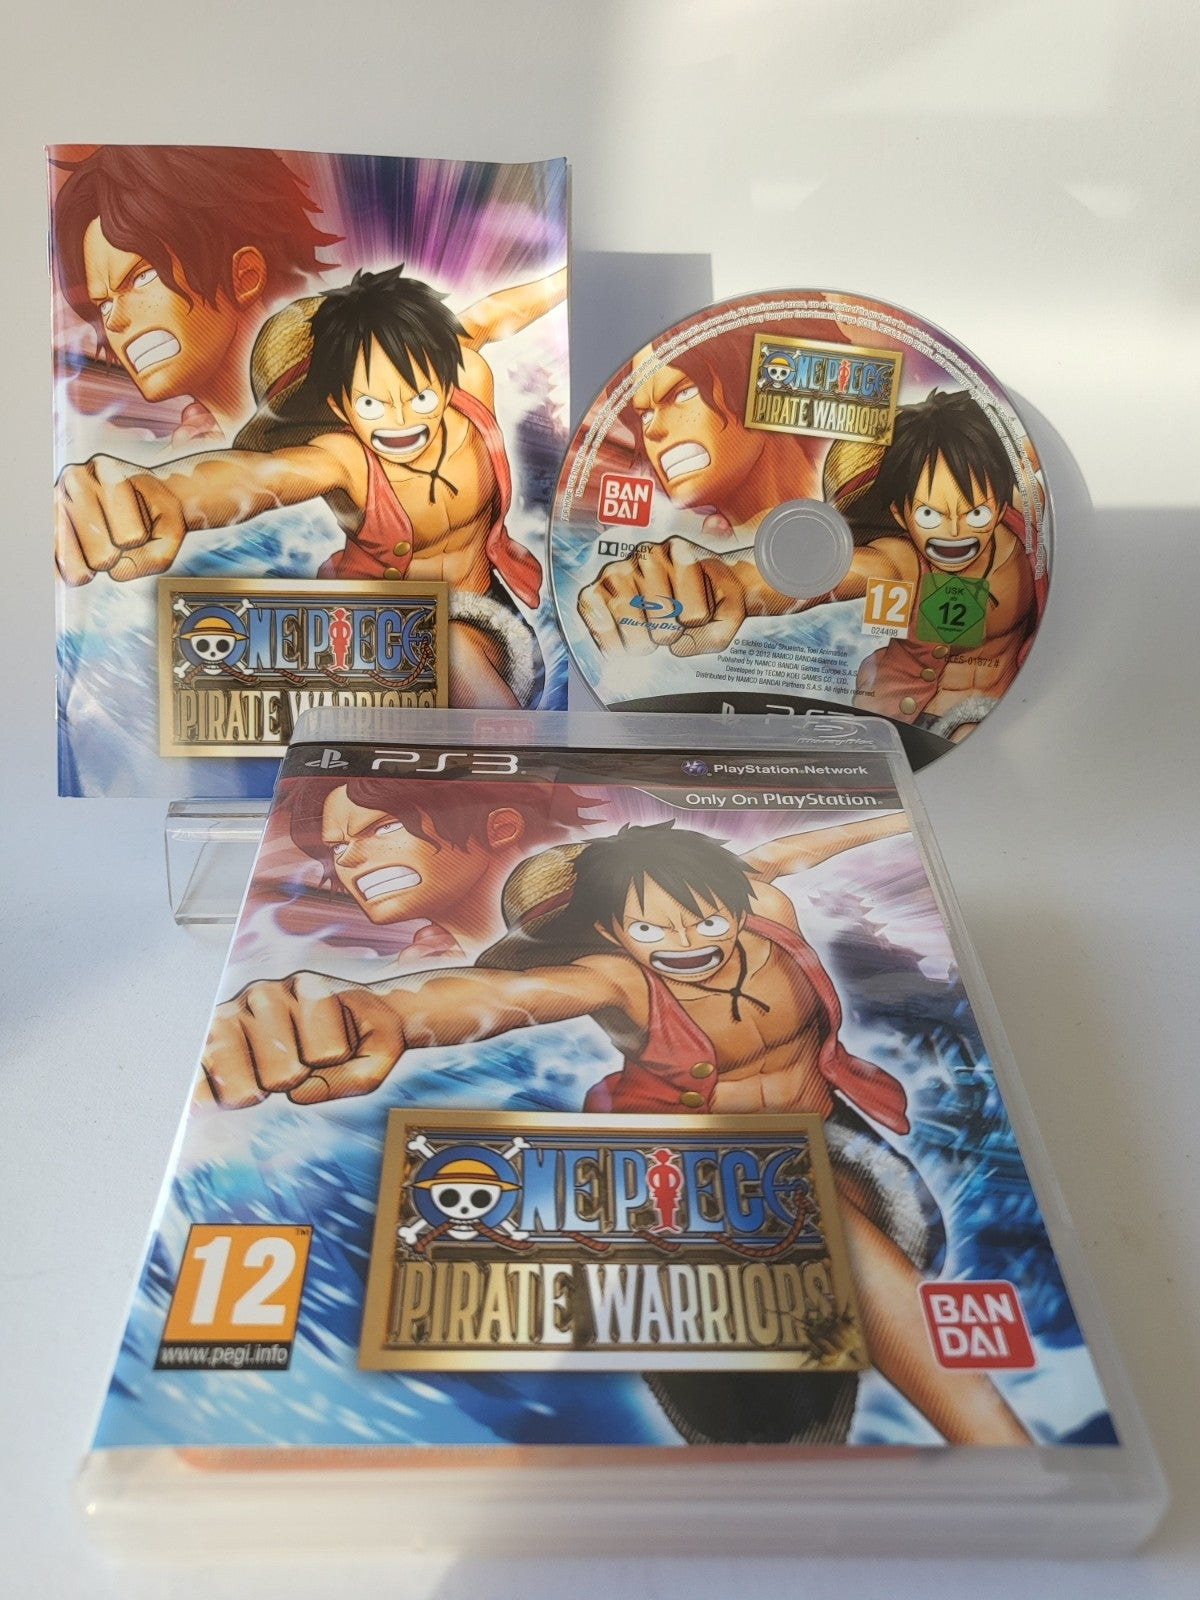 One Piece: Pirate Warriors Playstation 3